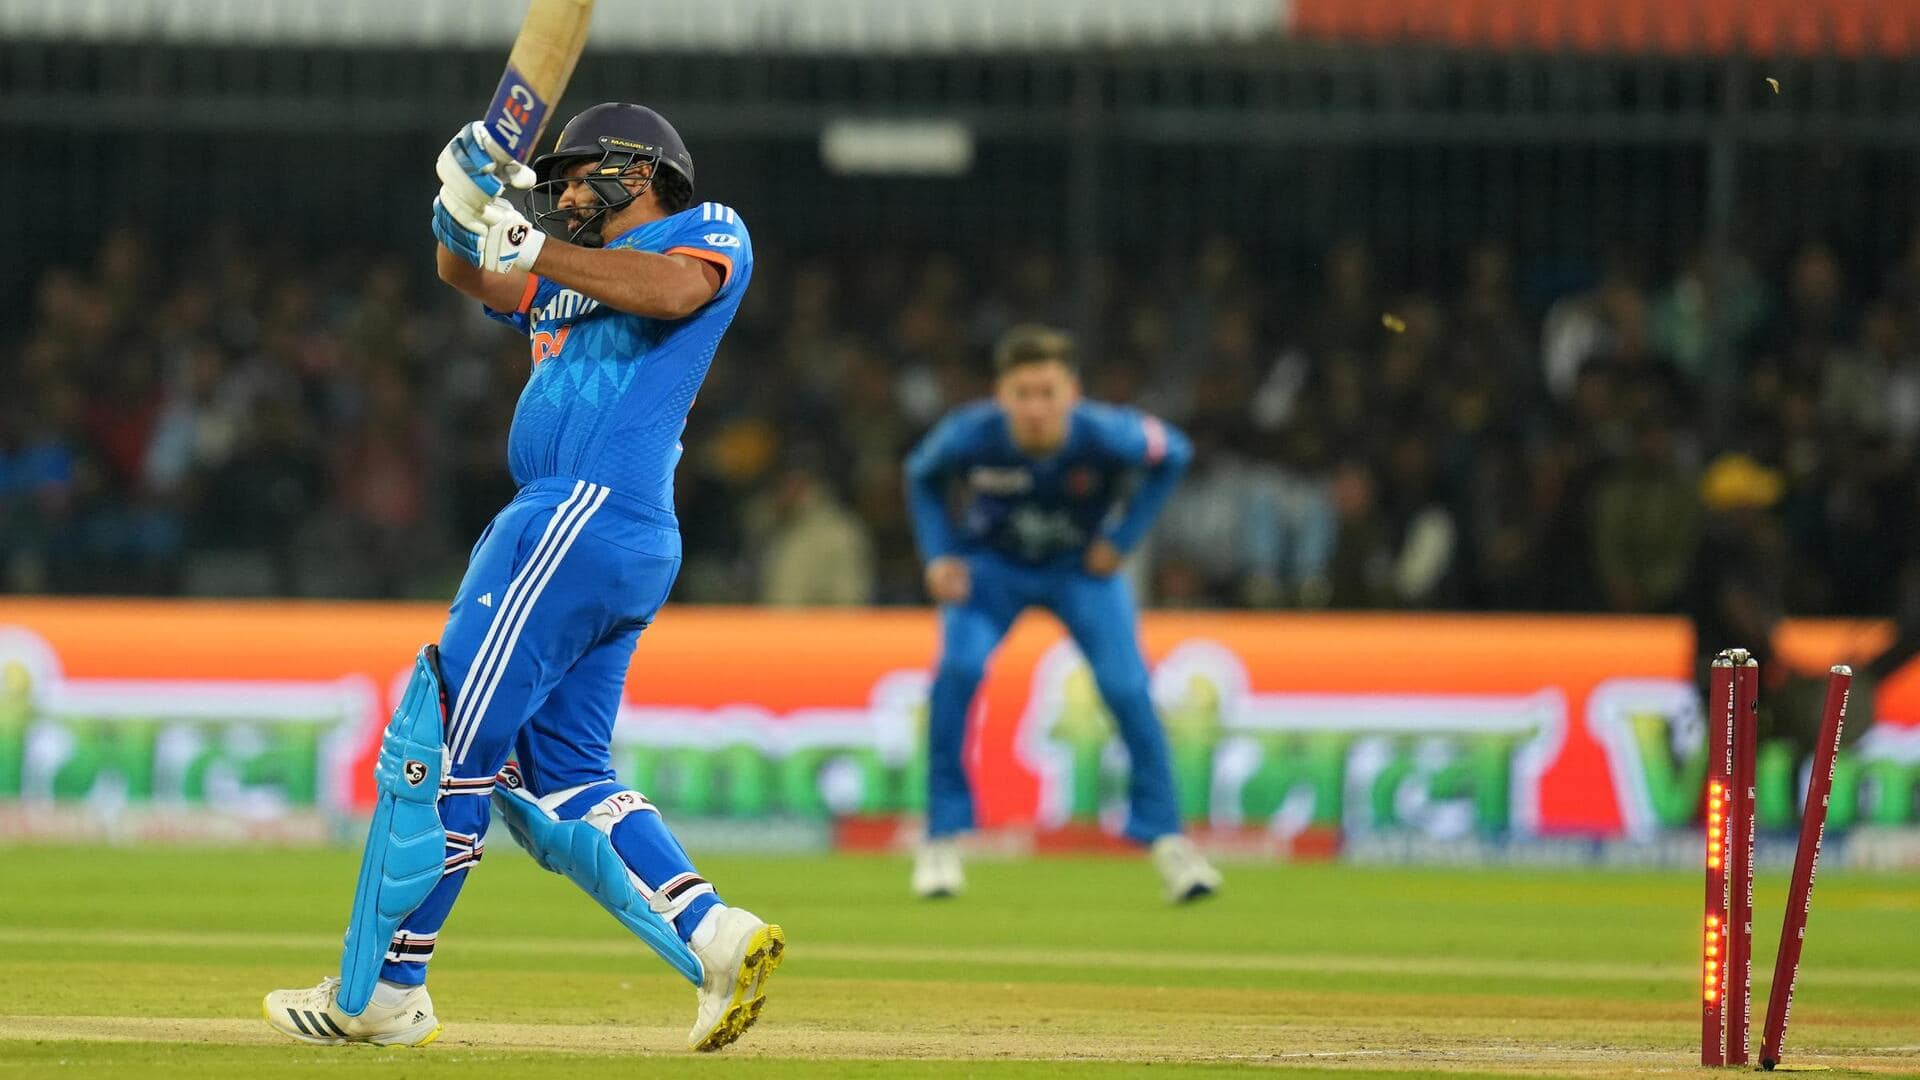 Rohit Sharma has the most ducks in T20I cricket: Stats